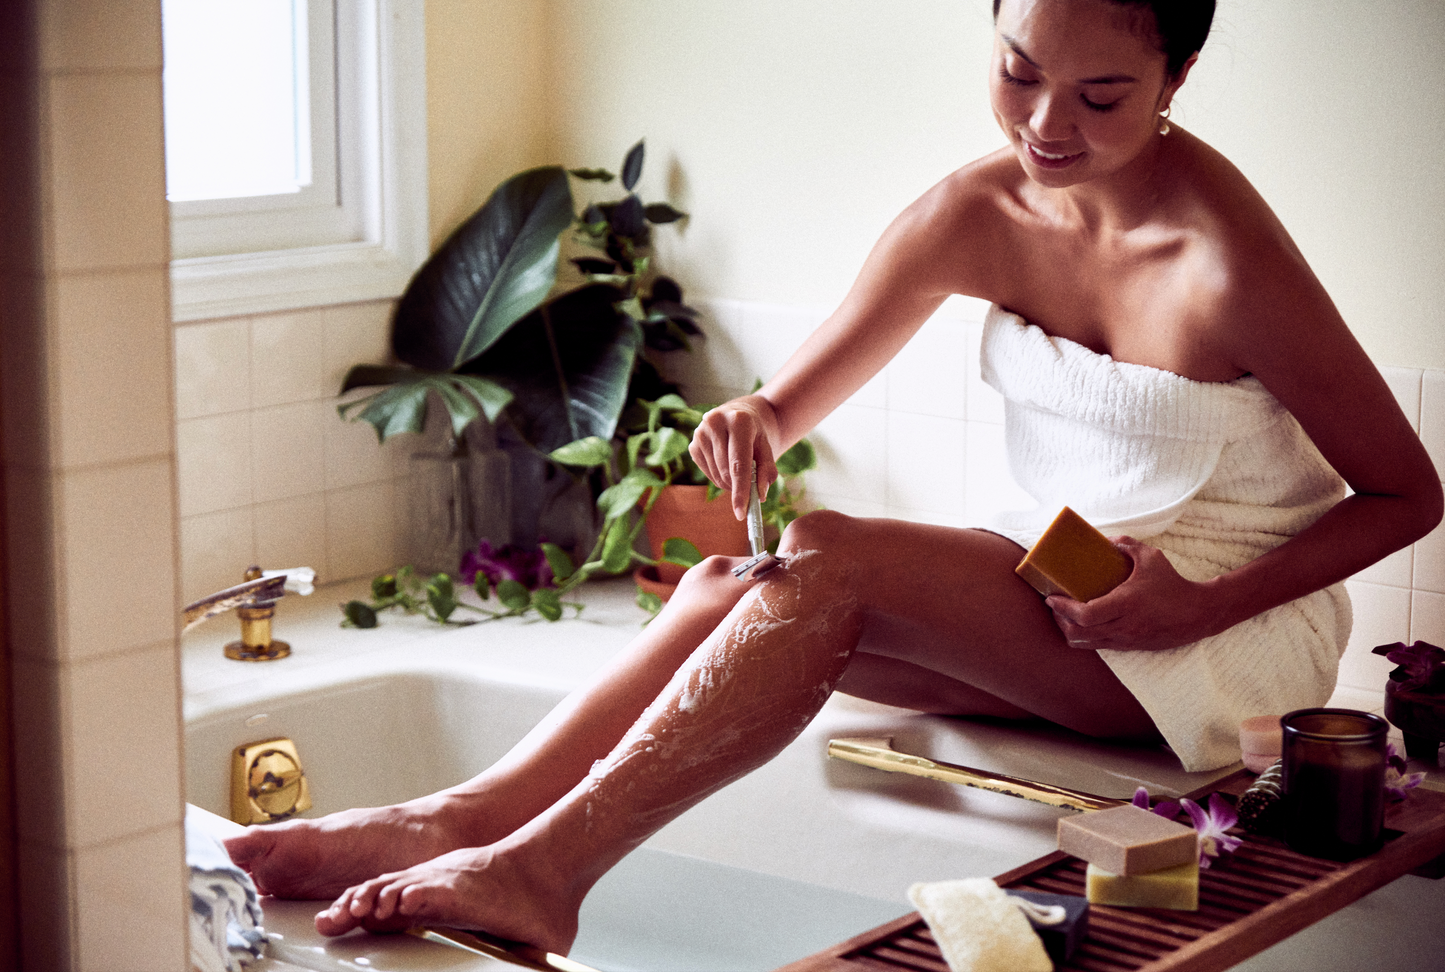 This image shows a metal reusable safety razor for body and face shaving as a plastic free alternative to disposable razors. It comes with replacement blades. It is designed for eco friendly zero waste plastic free more sustainable shaving. In the image a woman is using the metal safety razor to shave her legs